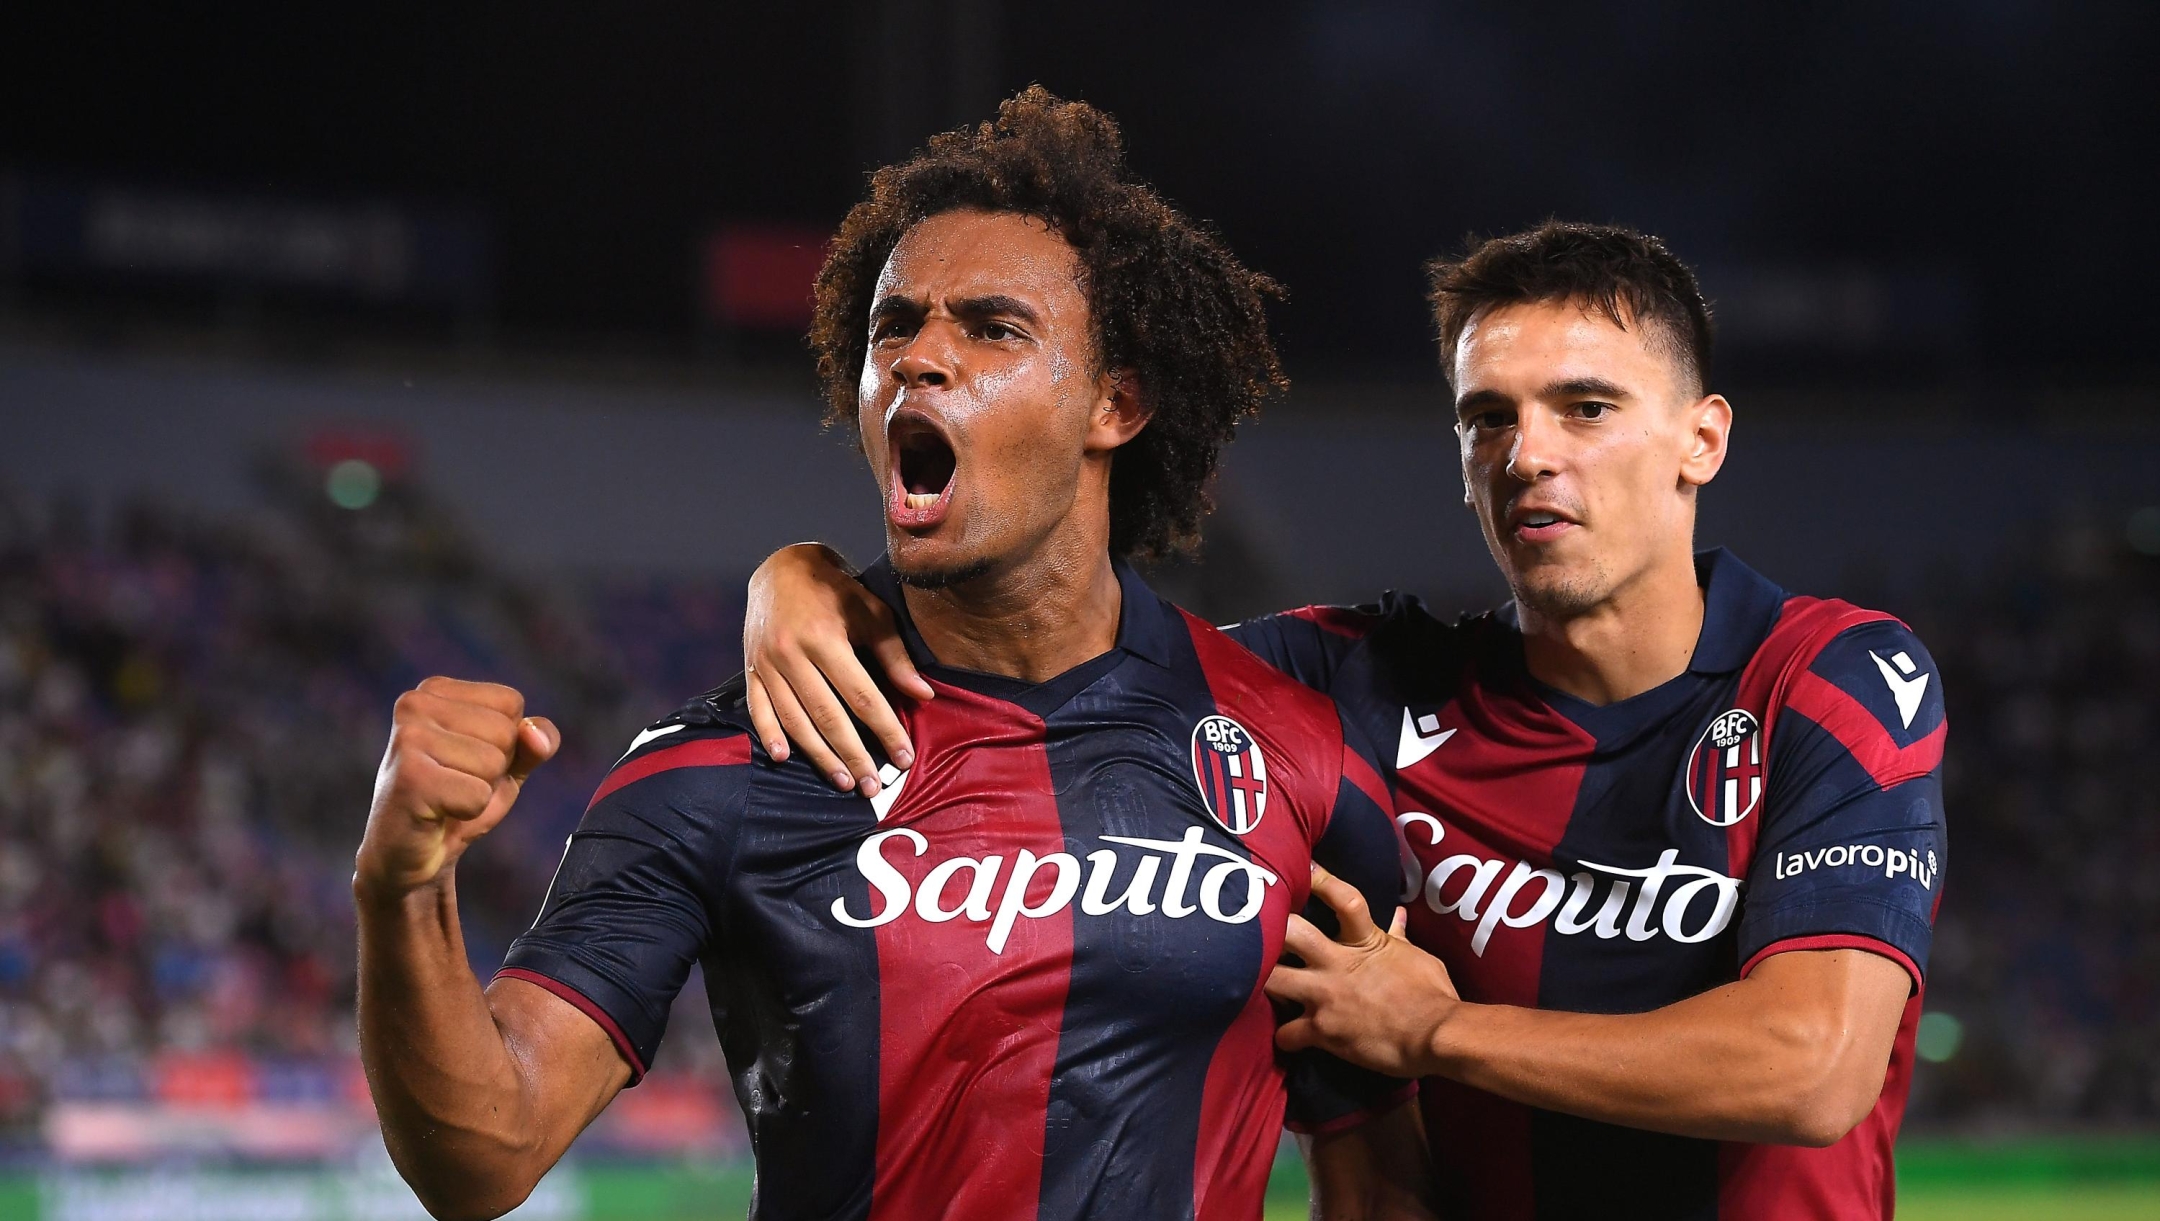 BOLOGNA, ITALY - SEPTEMBER 02: Joshua Zirkzee of Bologna and teammate Riccardo Orsolini celebrate following the team's victory during the Serie A TIM match between Bologna FC and Cagliari Calcio at Stadio Renato Dall'Ara on September 02, 2023 in Bologna, Italy. (Photo by Alessandro Sabattini/Getty Images)